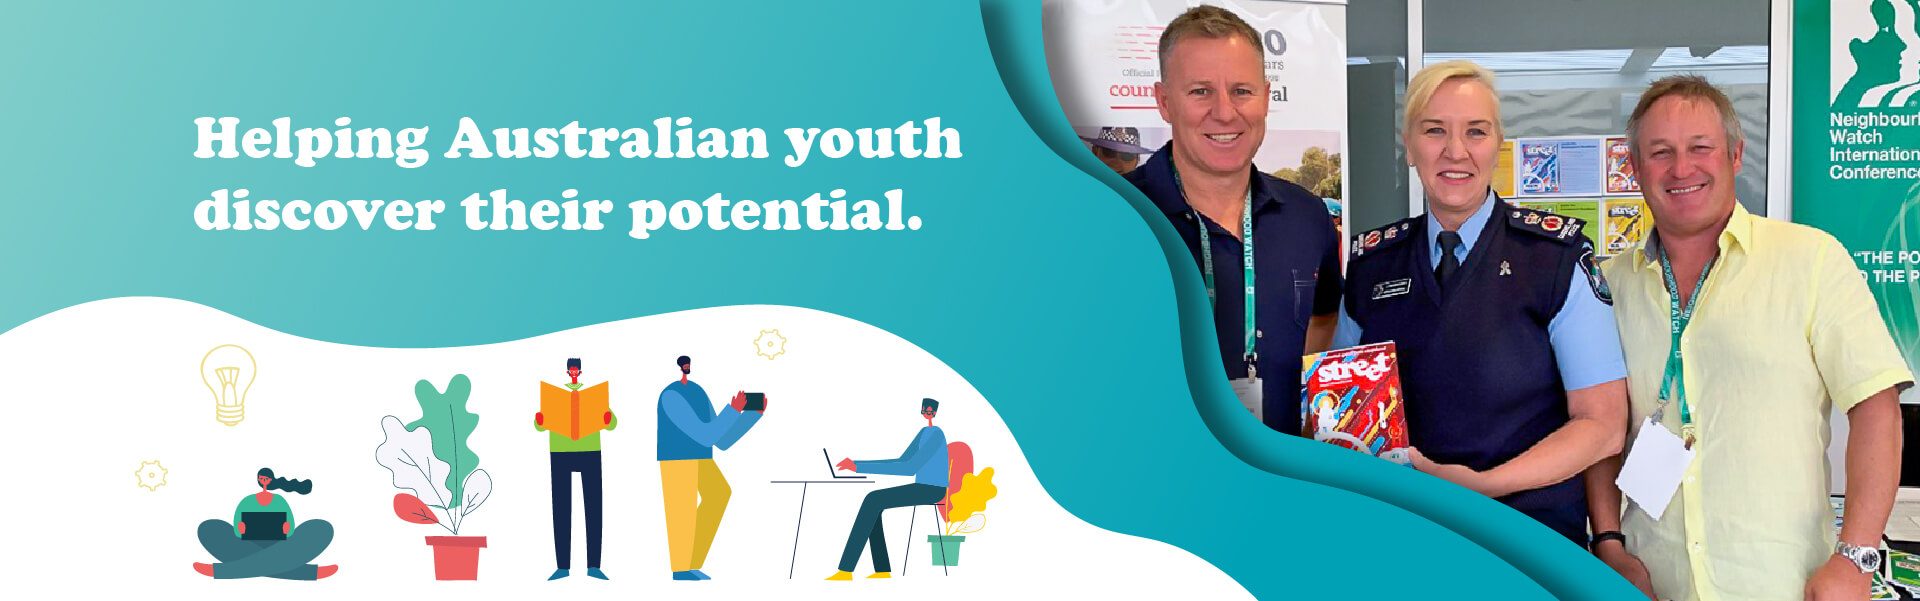 Streetsmart Handbooks helping Australian youth discover their potential